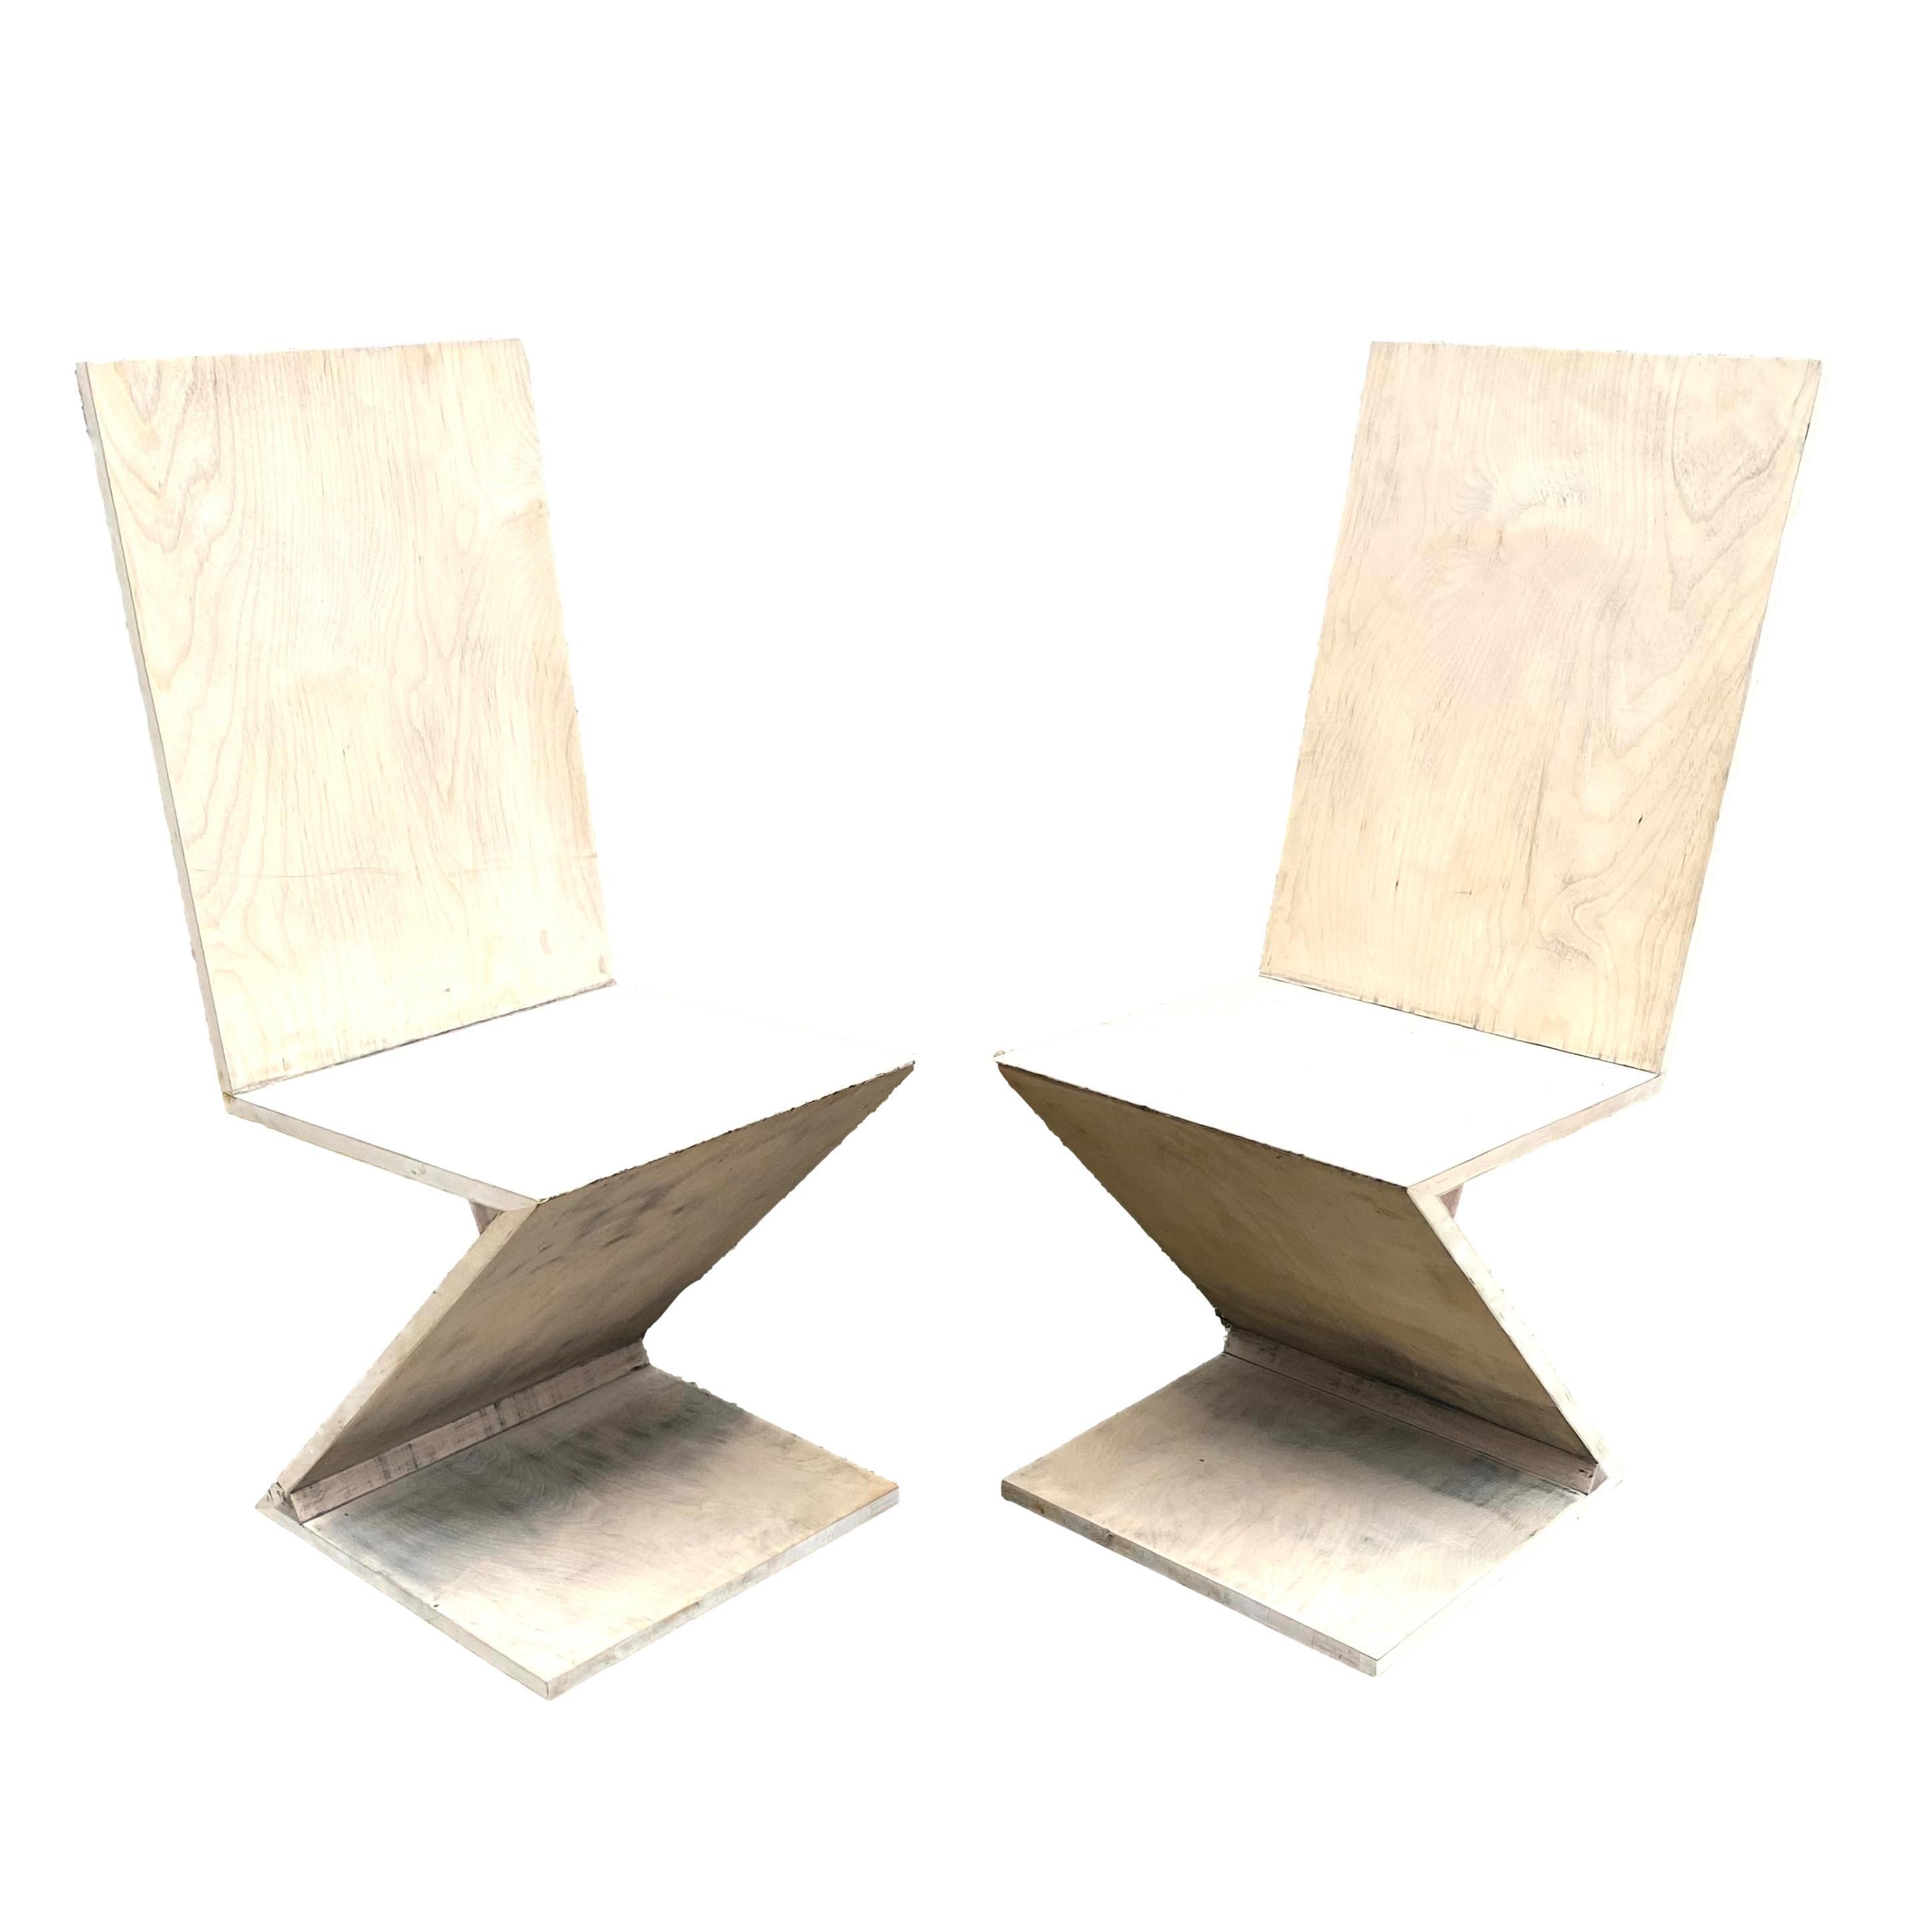 Pair of zig zag chairs in the style of Gerrit Rietveld. Will sell individually.